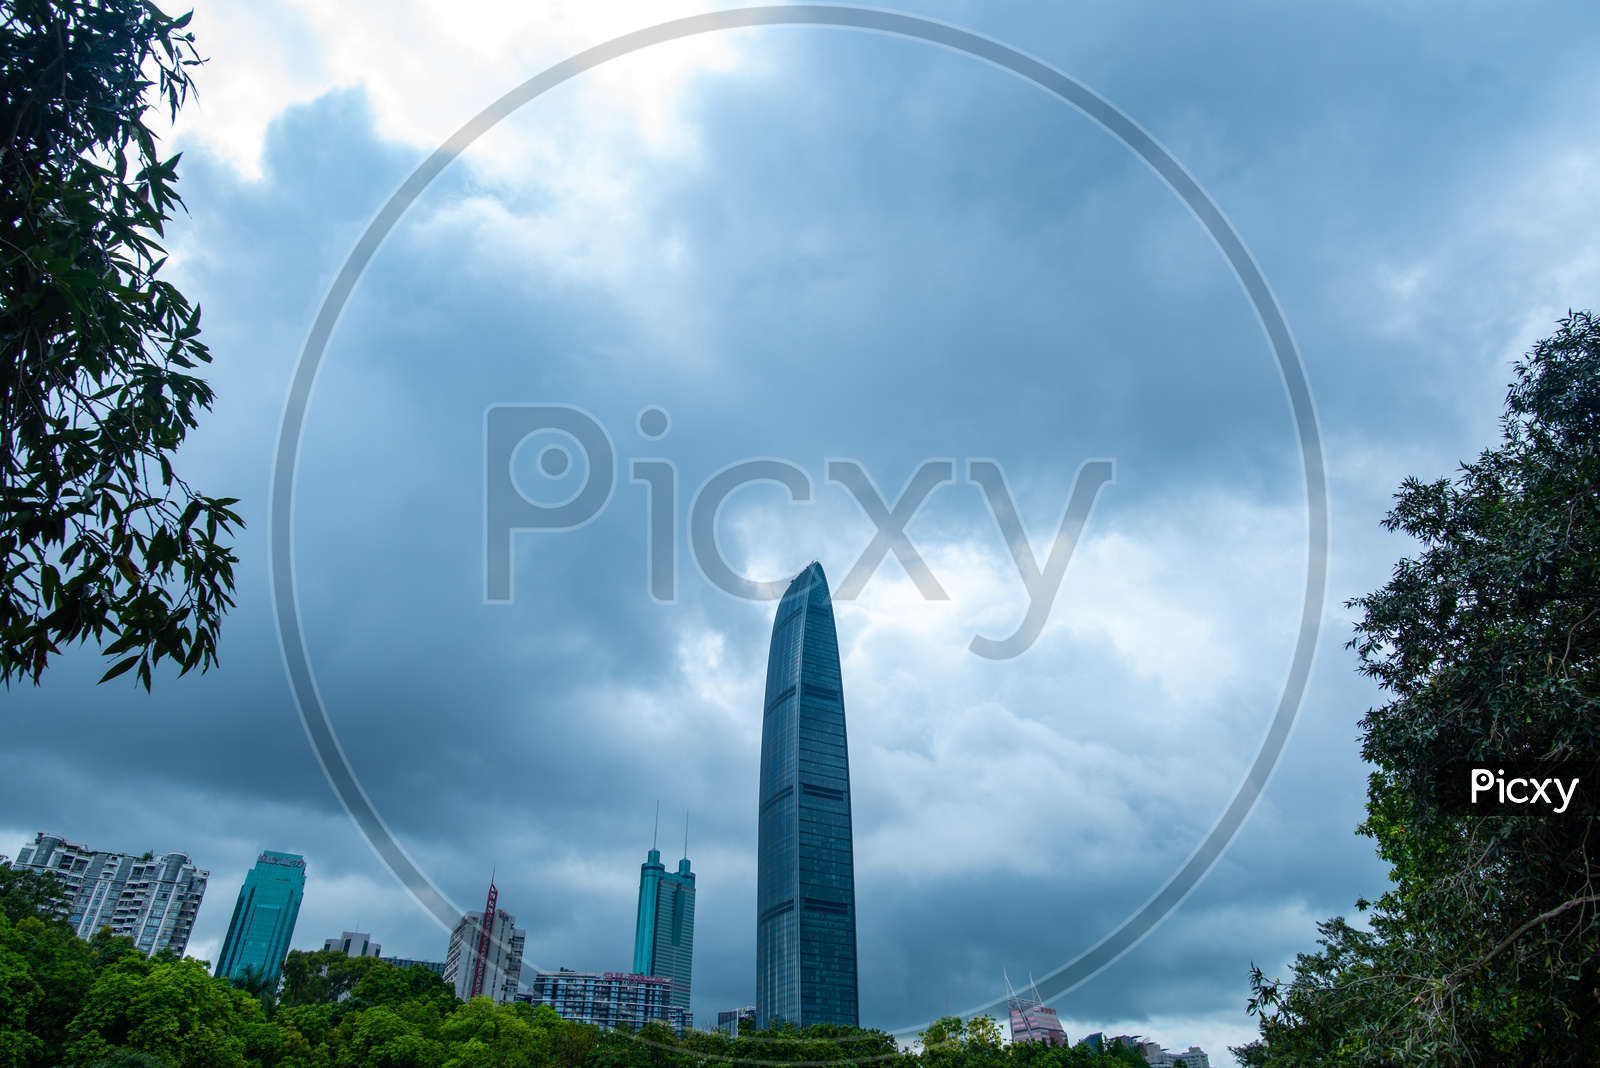 KingKey KK100 Tower or Skyscraper View With Sky and clouds